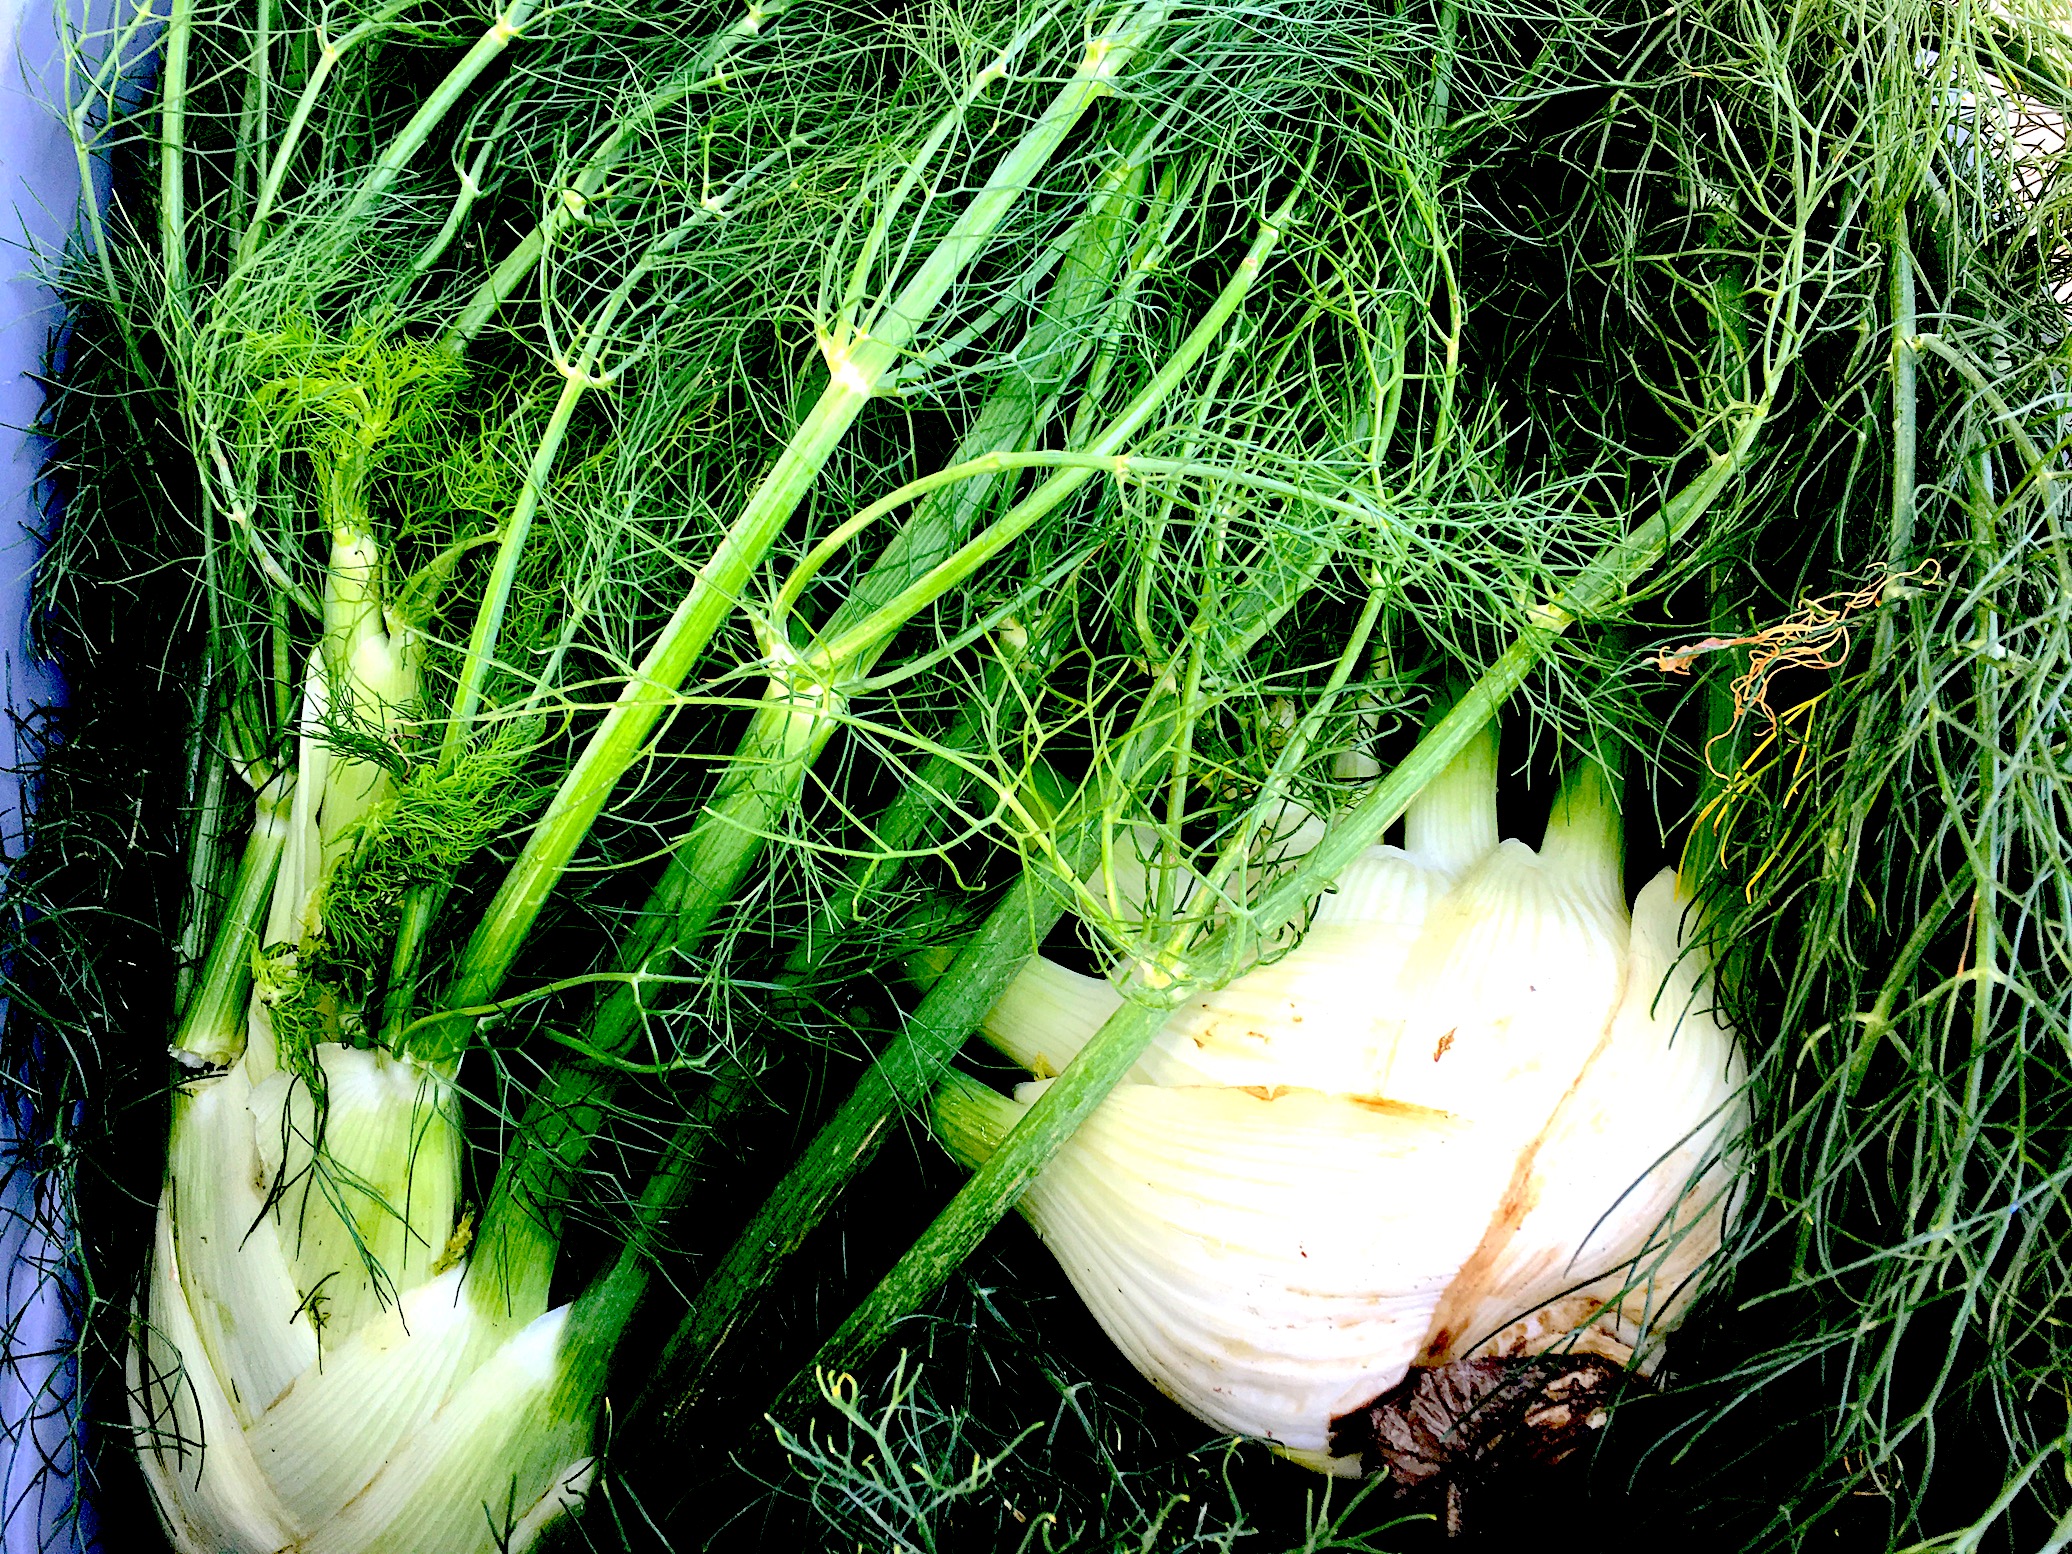 The fennel is gorgeous this weekend.